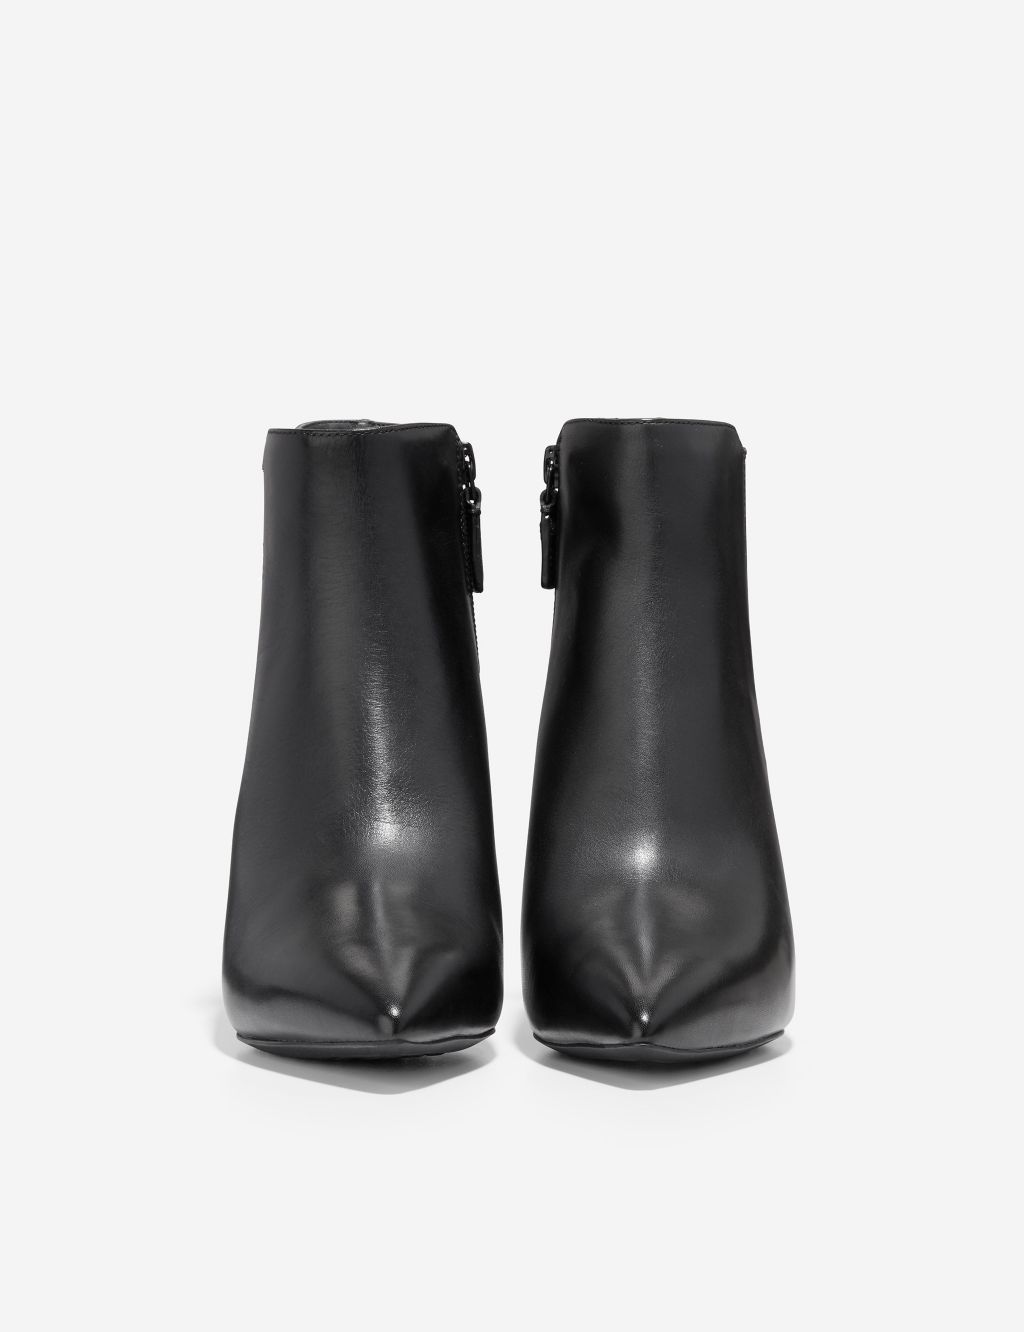 Go-To Park Leather Kitten Heel Ankle Boots image 6